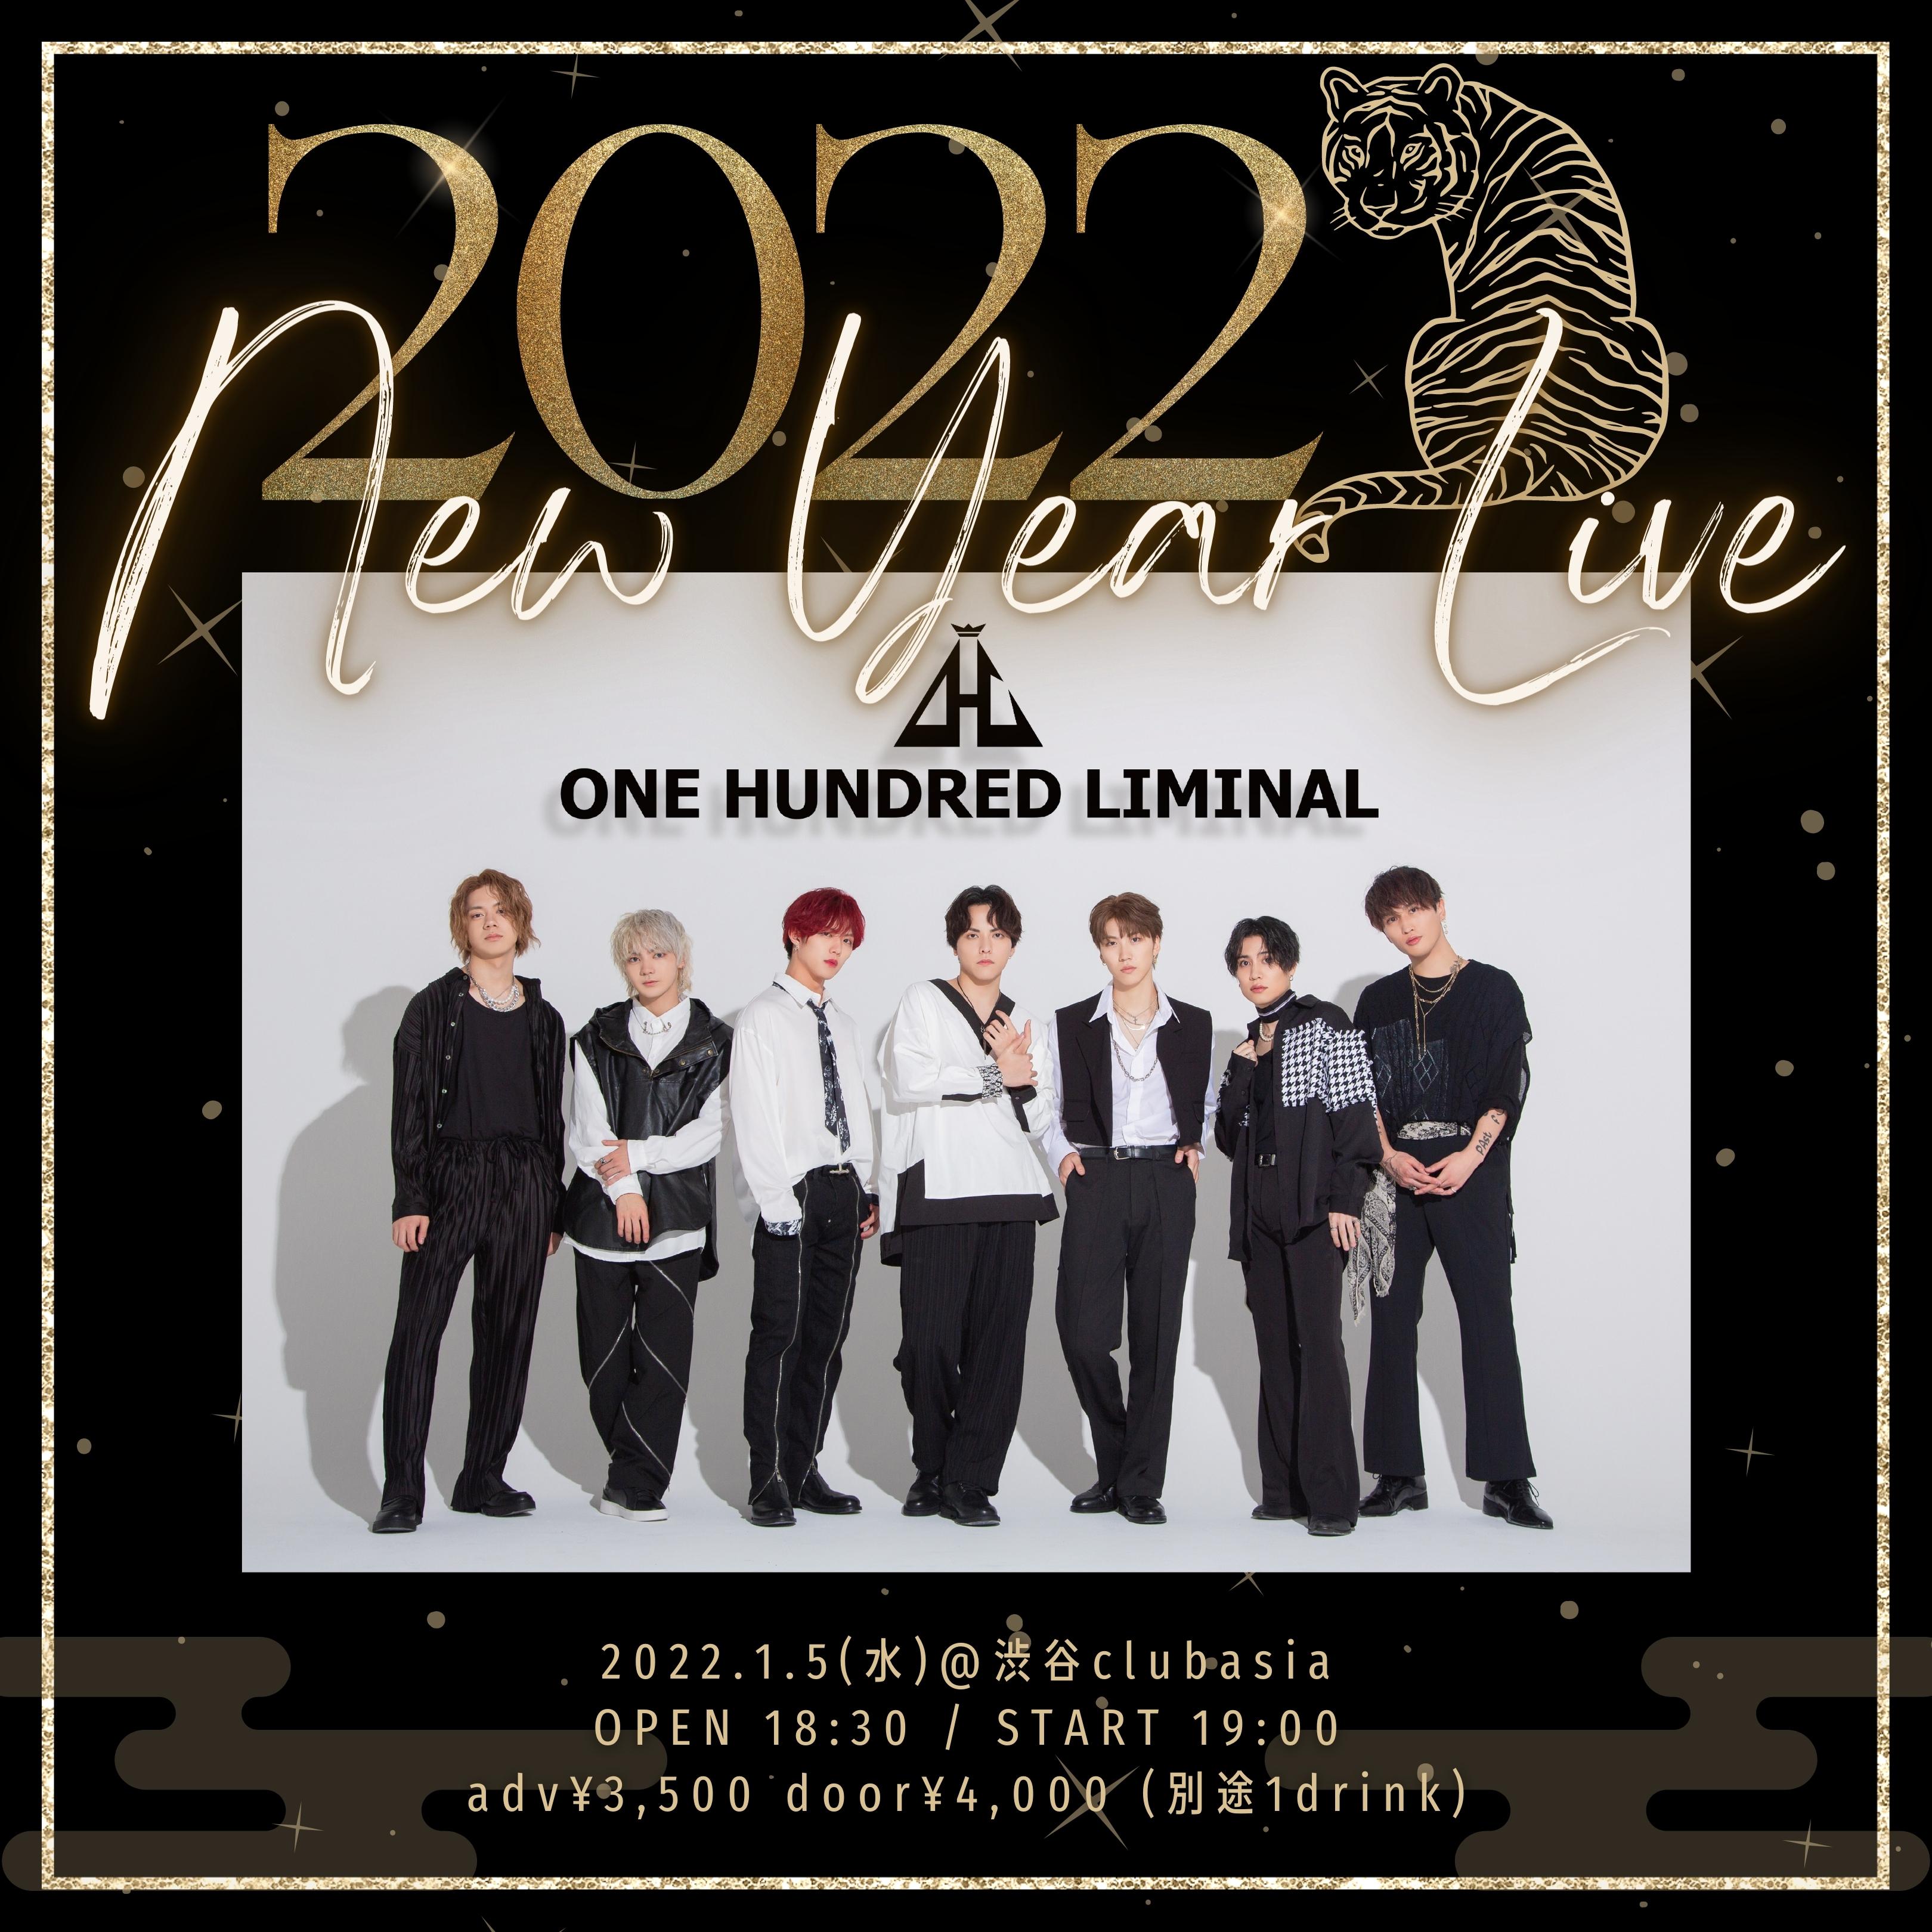 NEW YEAR LIVE 2022